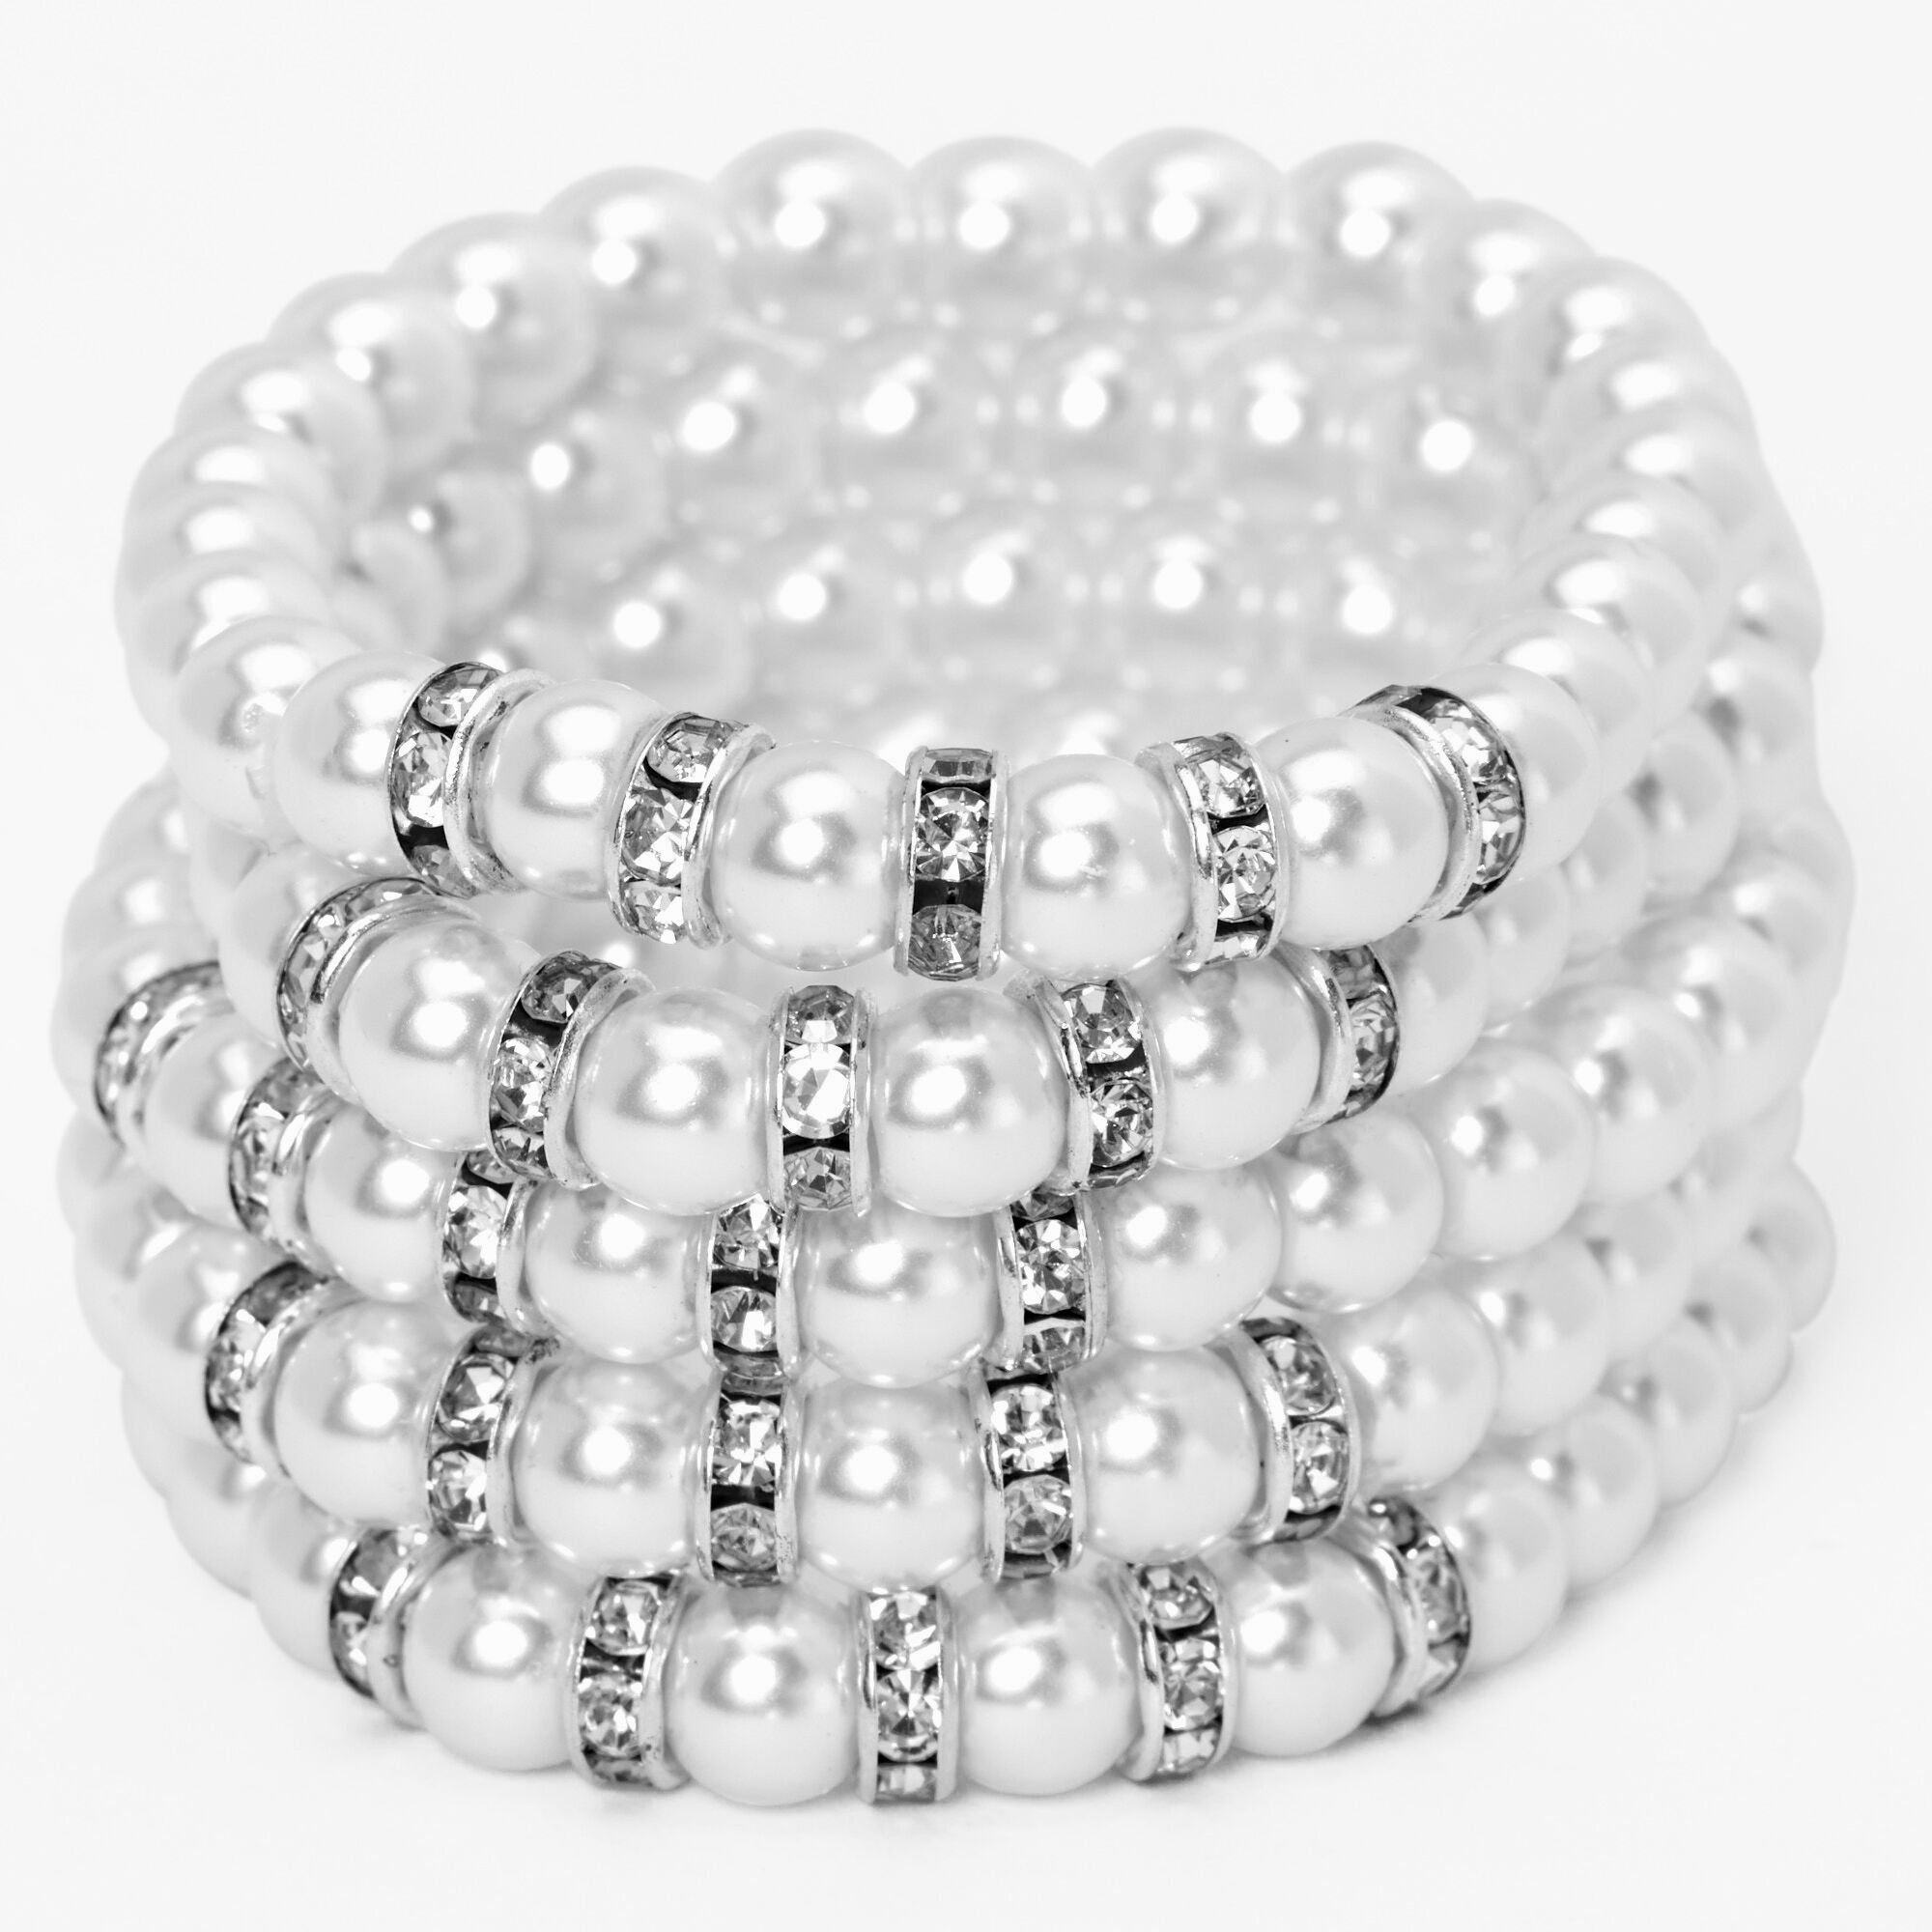 View Claires Pearl And Tone Beaded Stretch Bracelets 5 Pack Silver information